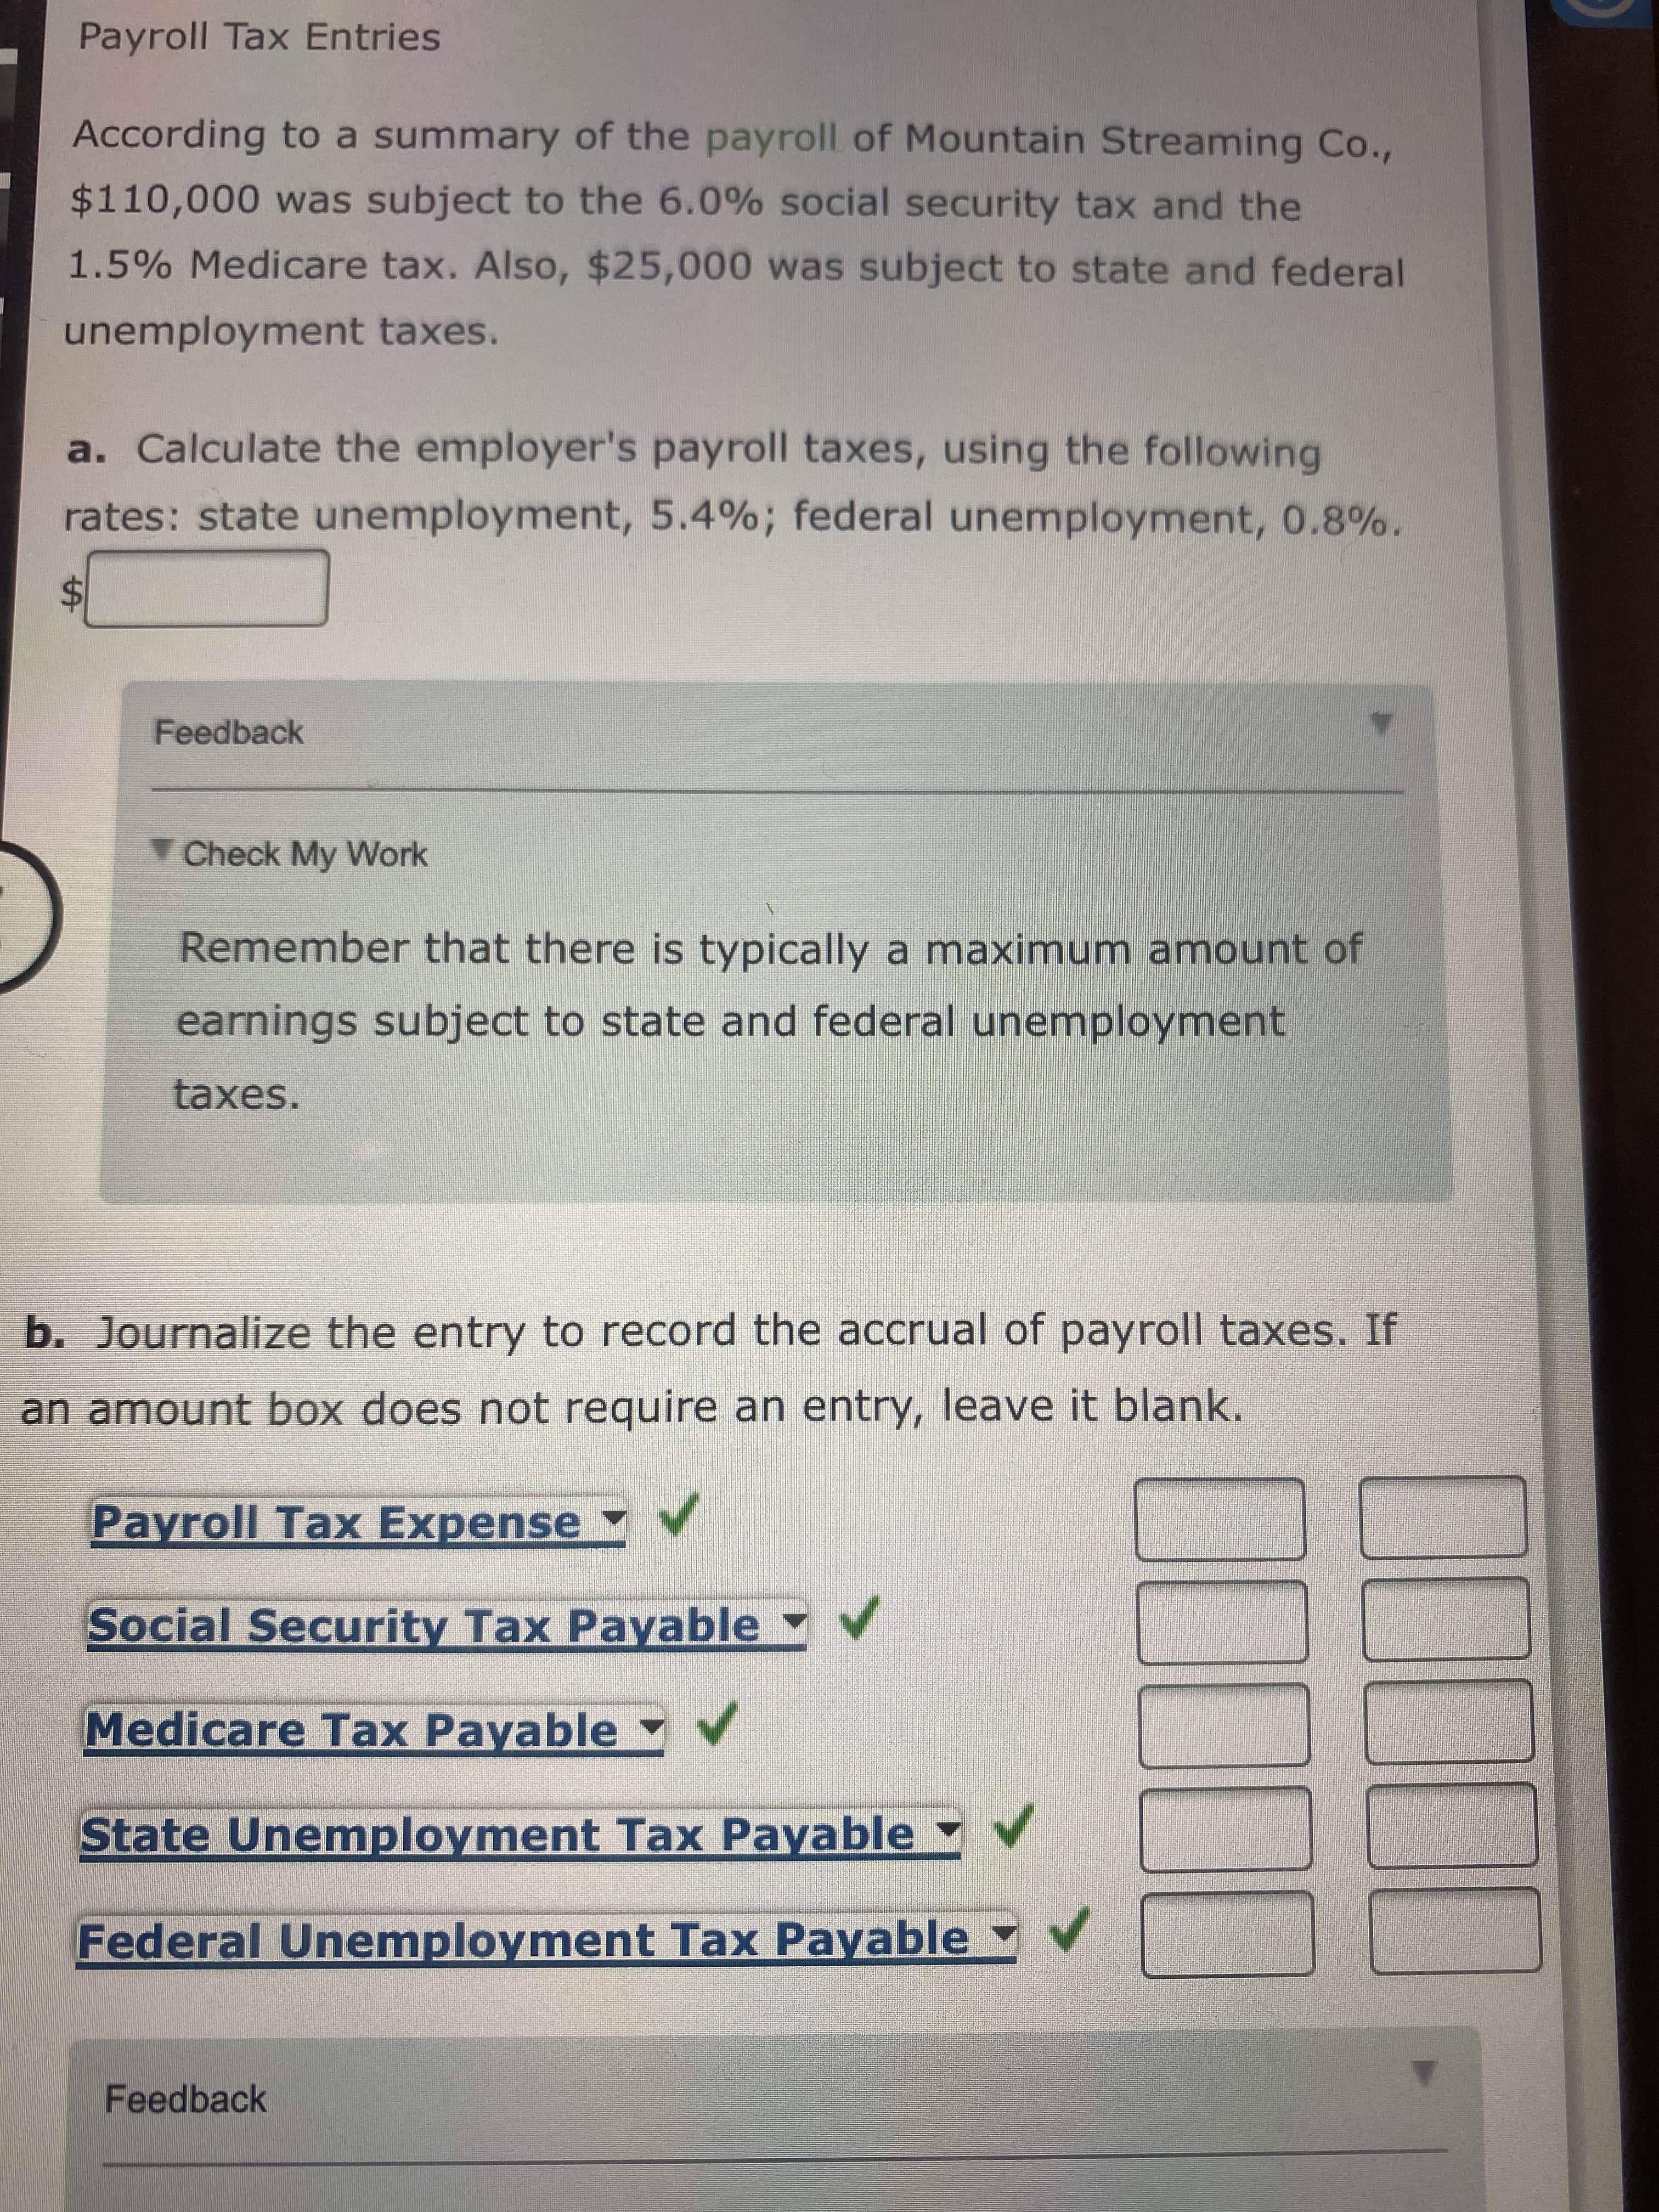 %24
Payroll Tax Entries
According to a summary of the payroll of Mountain Streaming Co.,
$110,000 was subject to the 6.0% social security tax and the
1.5% Medicare tax. Also, $25,000 was subject to state and federal
unemployment taxes.
a. Calculate the employer's payroll taxes, using the following
rates: state unemployment, 5.4%; federal unemployment, 0.8%.
Feedback
Check My Work
Remember that there is typically a maximum amount of
earnings subject to state and federal unemployment
taxes.
b. Journalize the entry to record the accrual of payroll taxes. If
an amount box does not require an entry, leave it blank.
Payroll Tax Expense V
Social Security Tax Payable V
Medicare Tax Payable v
State Unemployment Tax Payable Yv
Federal Unemployment Tax Payable
Feedback
